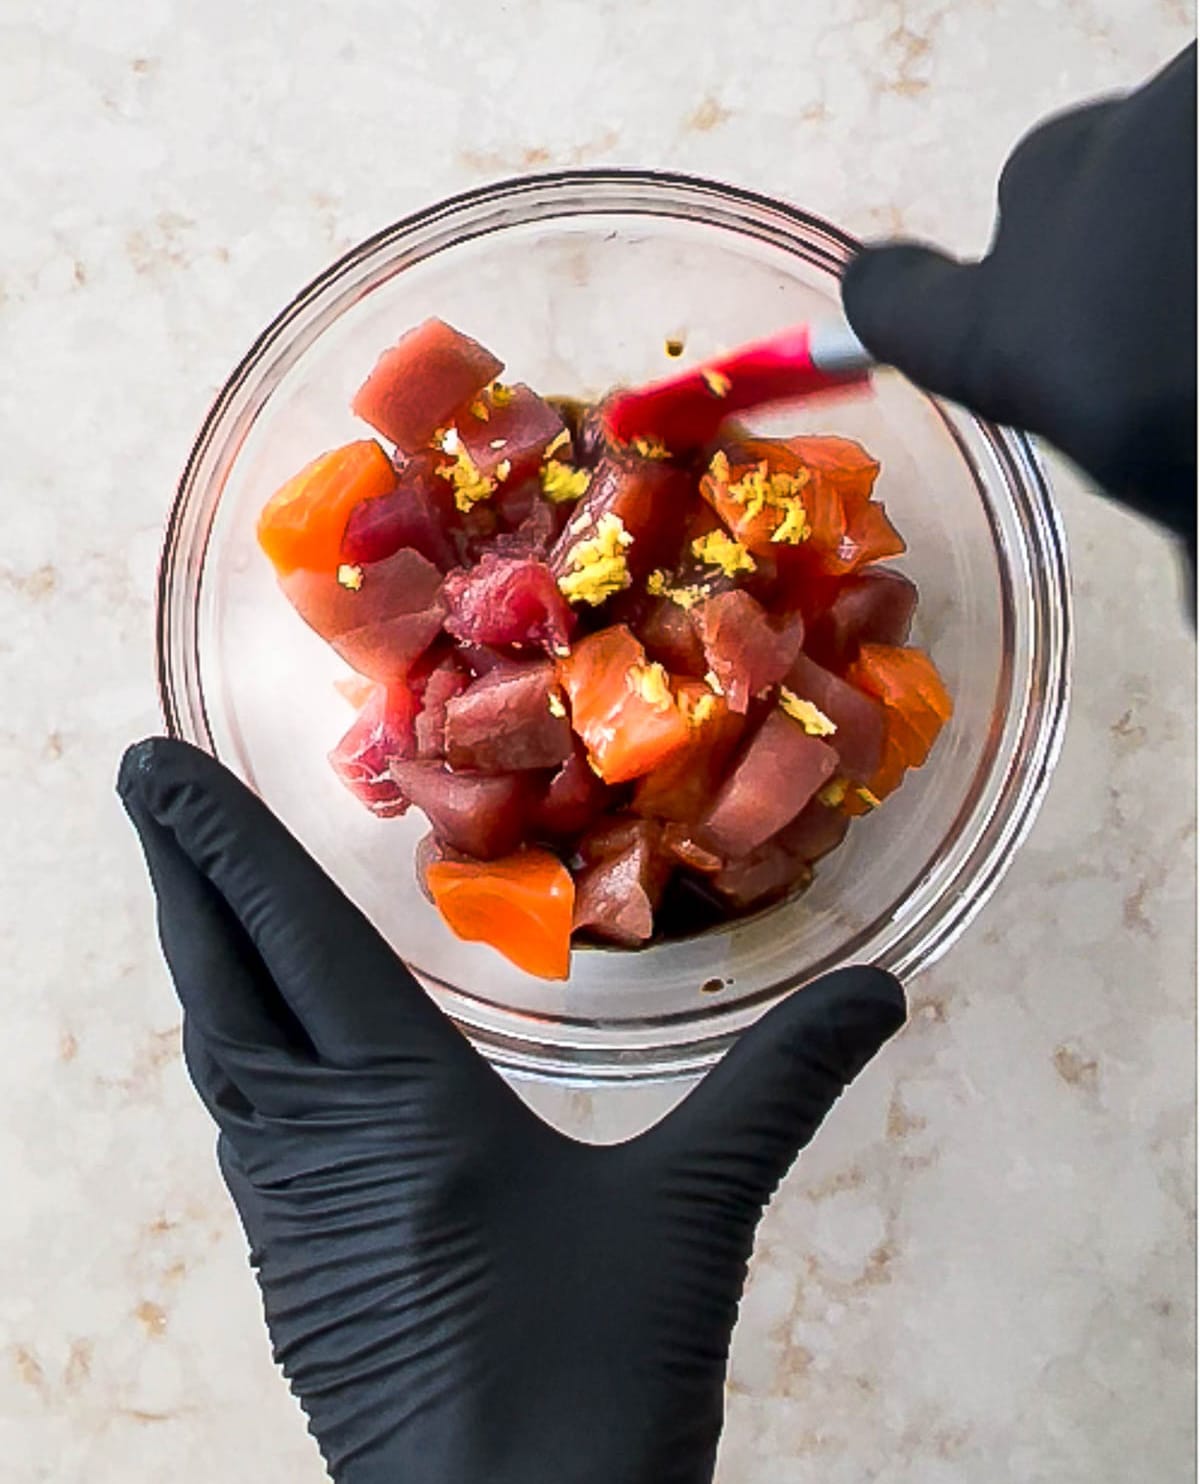 Two hands mixing up cubed salmon and tuna in a glass bowl on top of a marble surface.